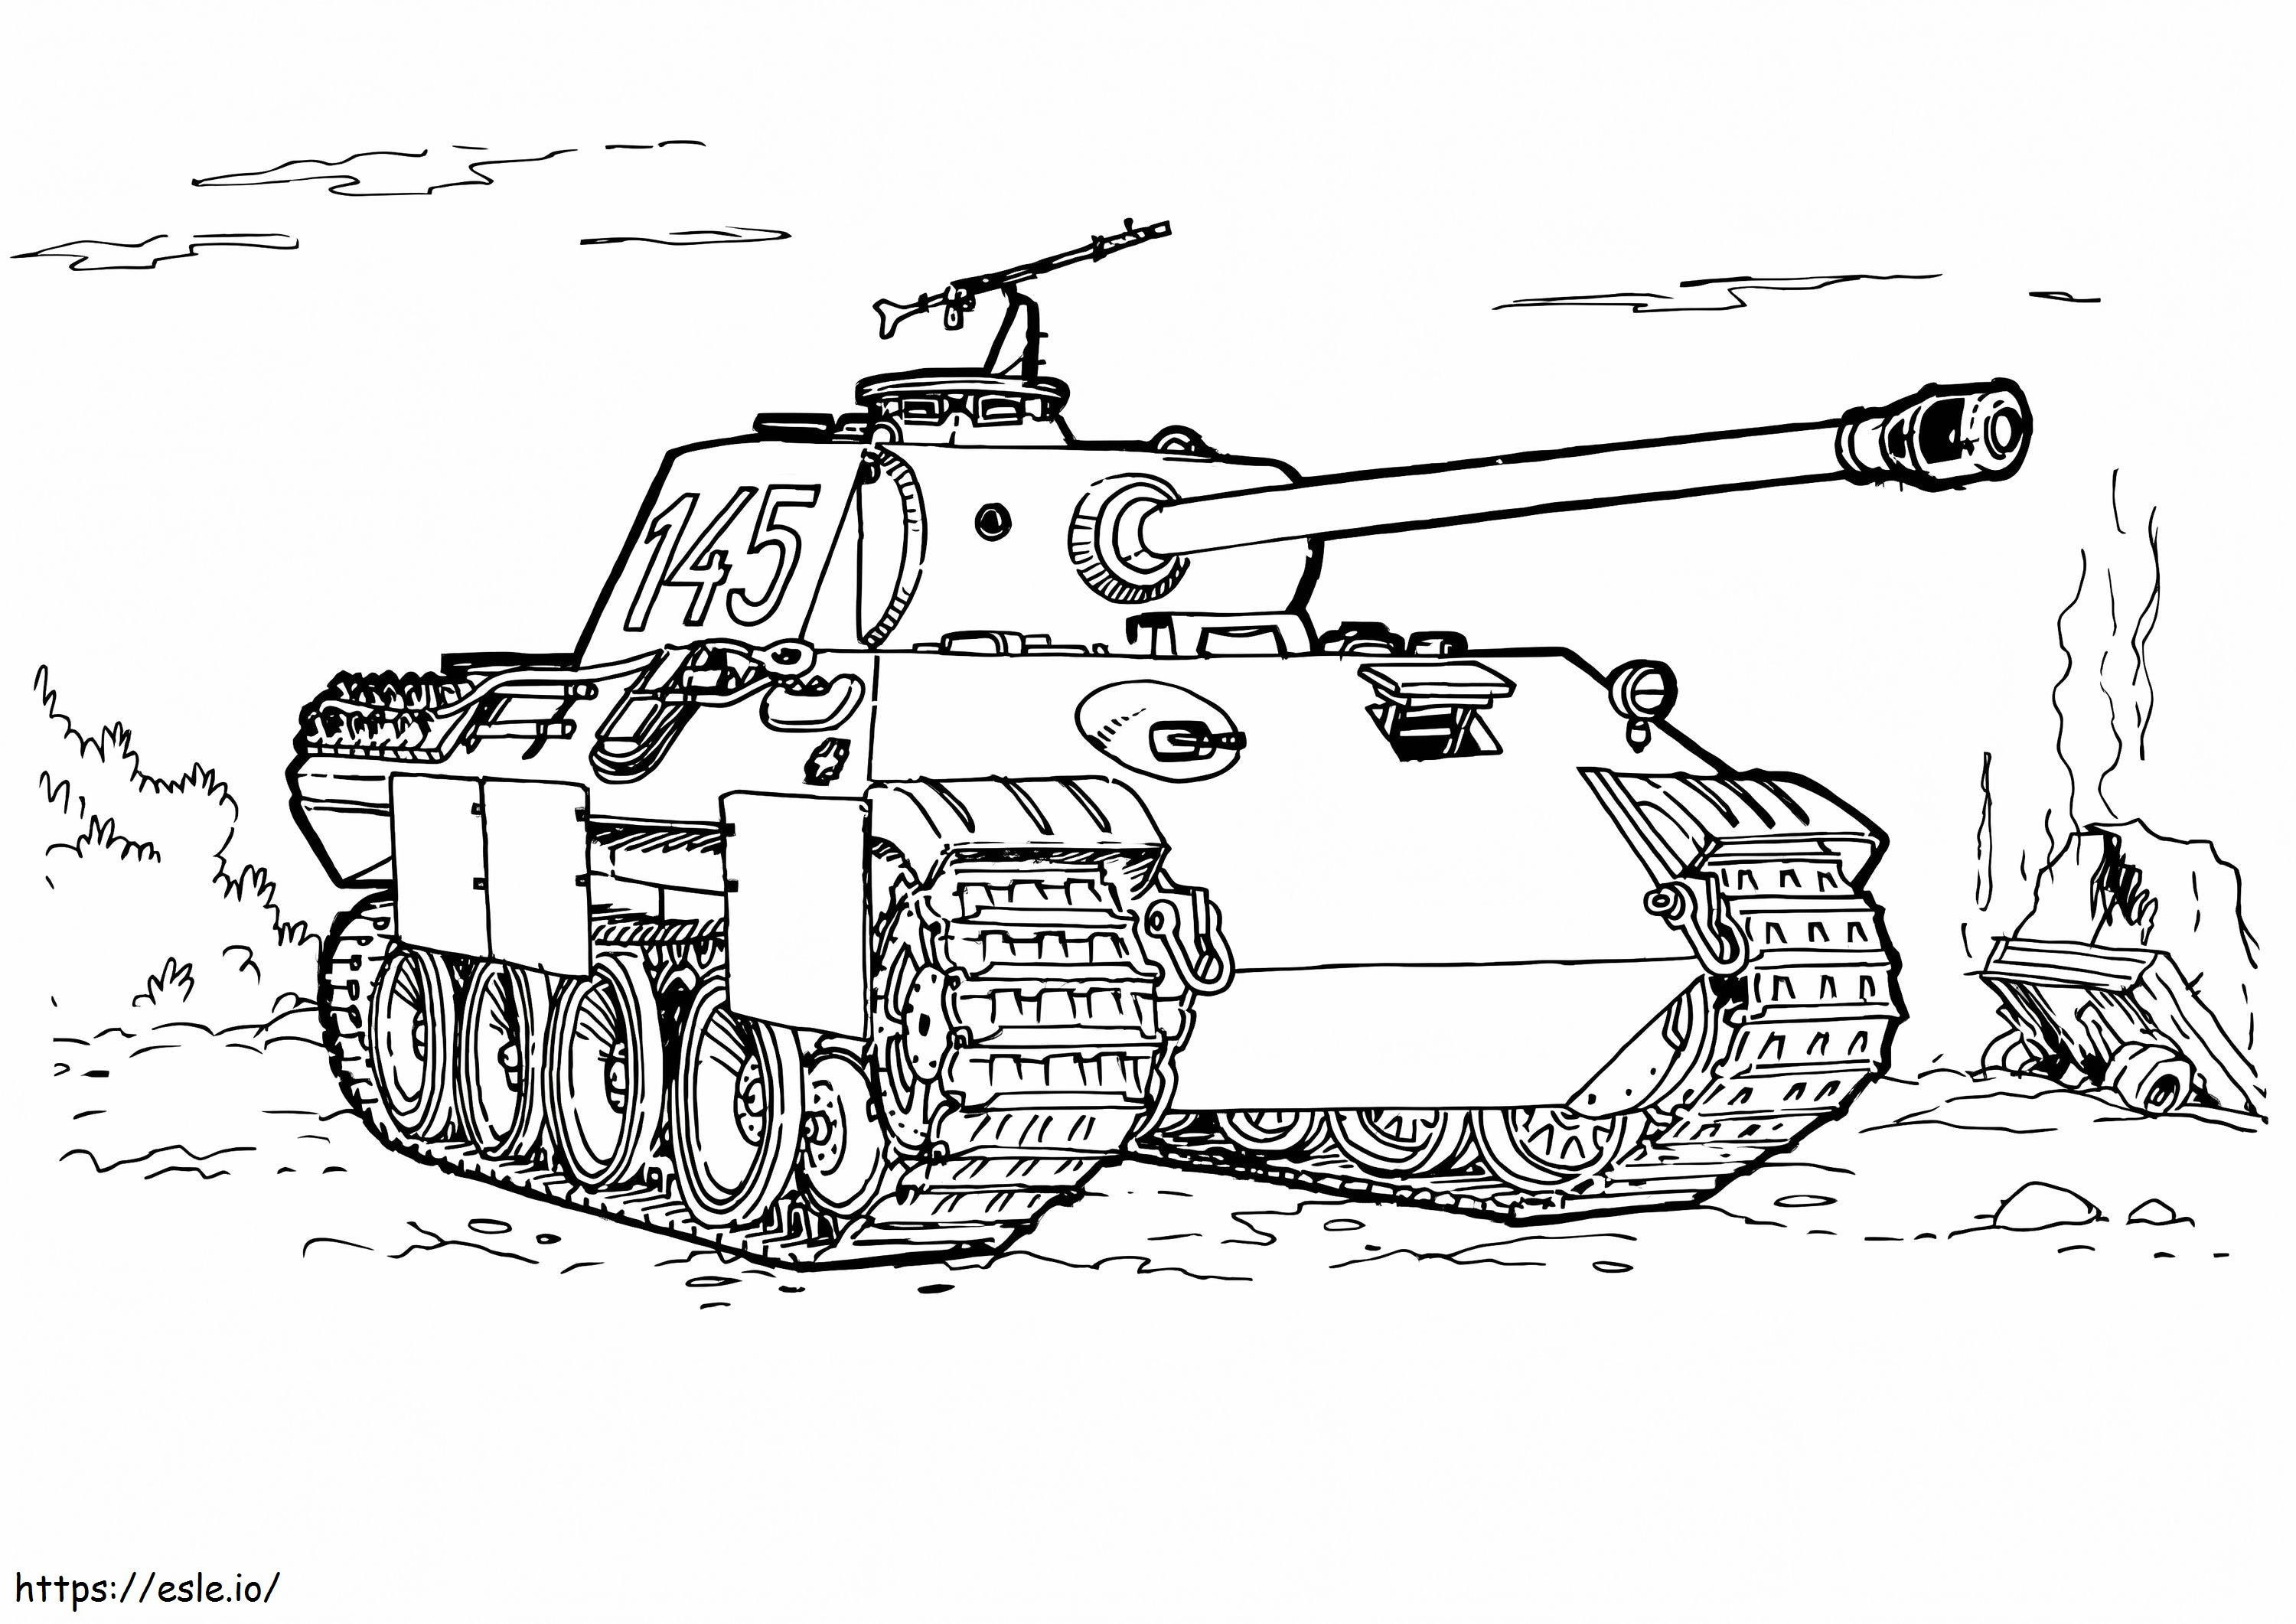 Panther Tank coloring page